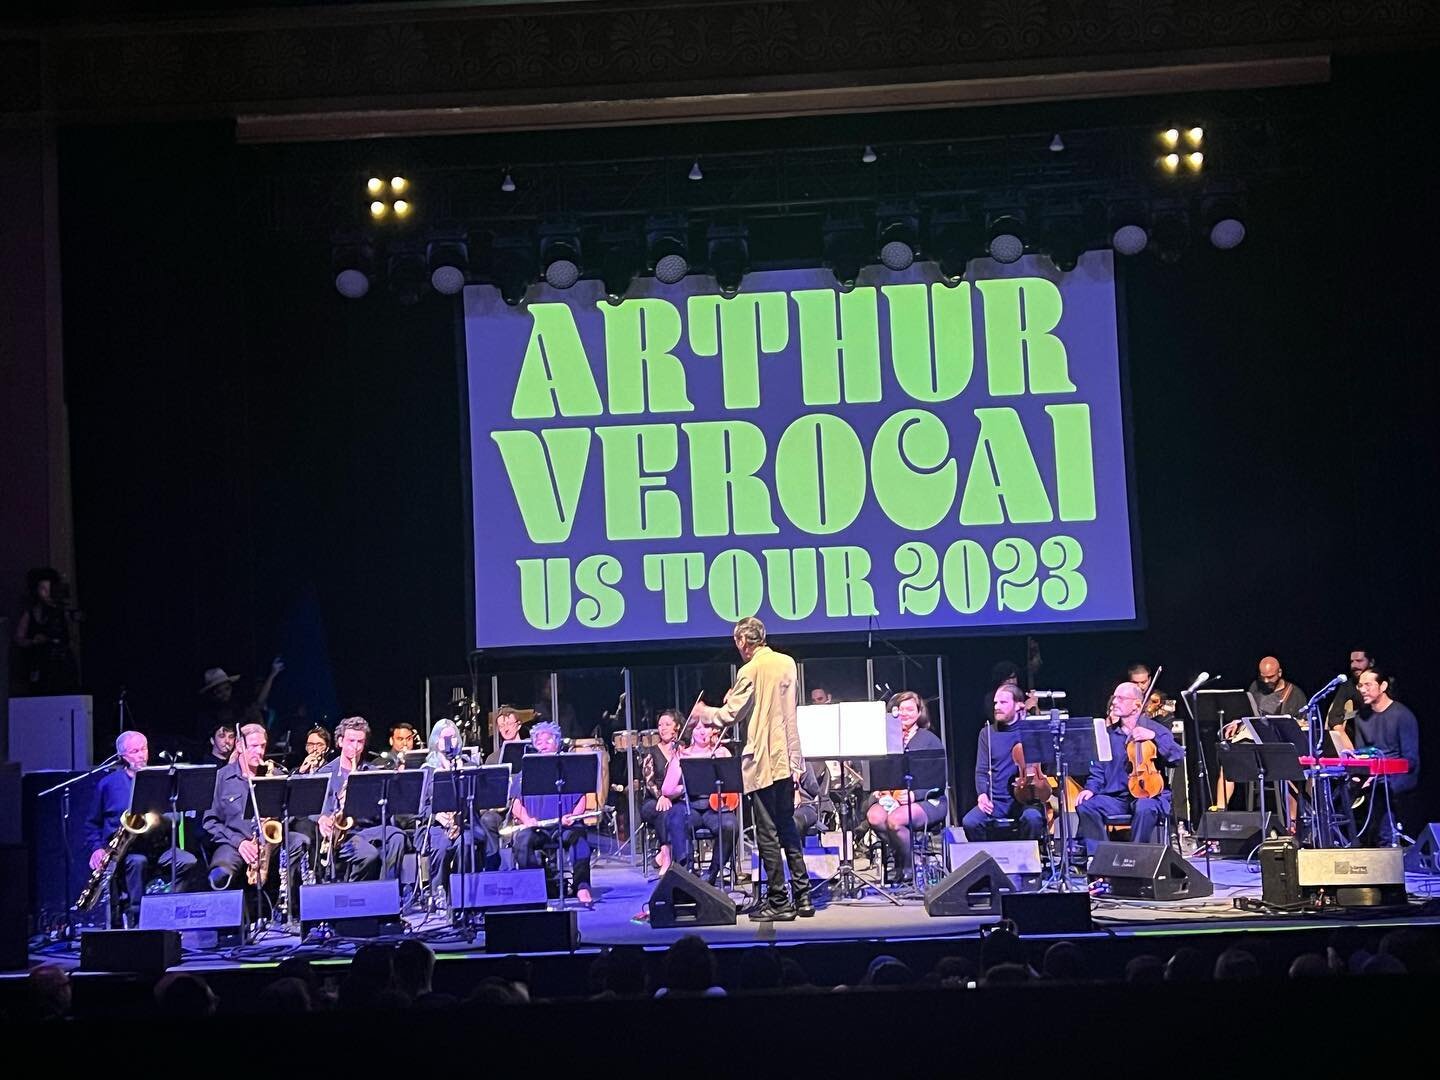 A rare night out to see the master Arthur Verocai and orchestra in Berkeley. Thanks to @jazz_is_dead and all the musicians and crew for pulling this off.